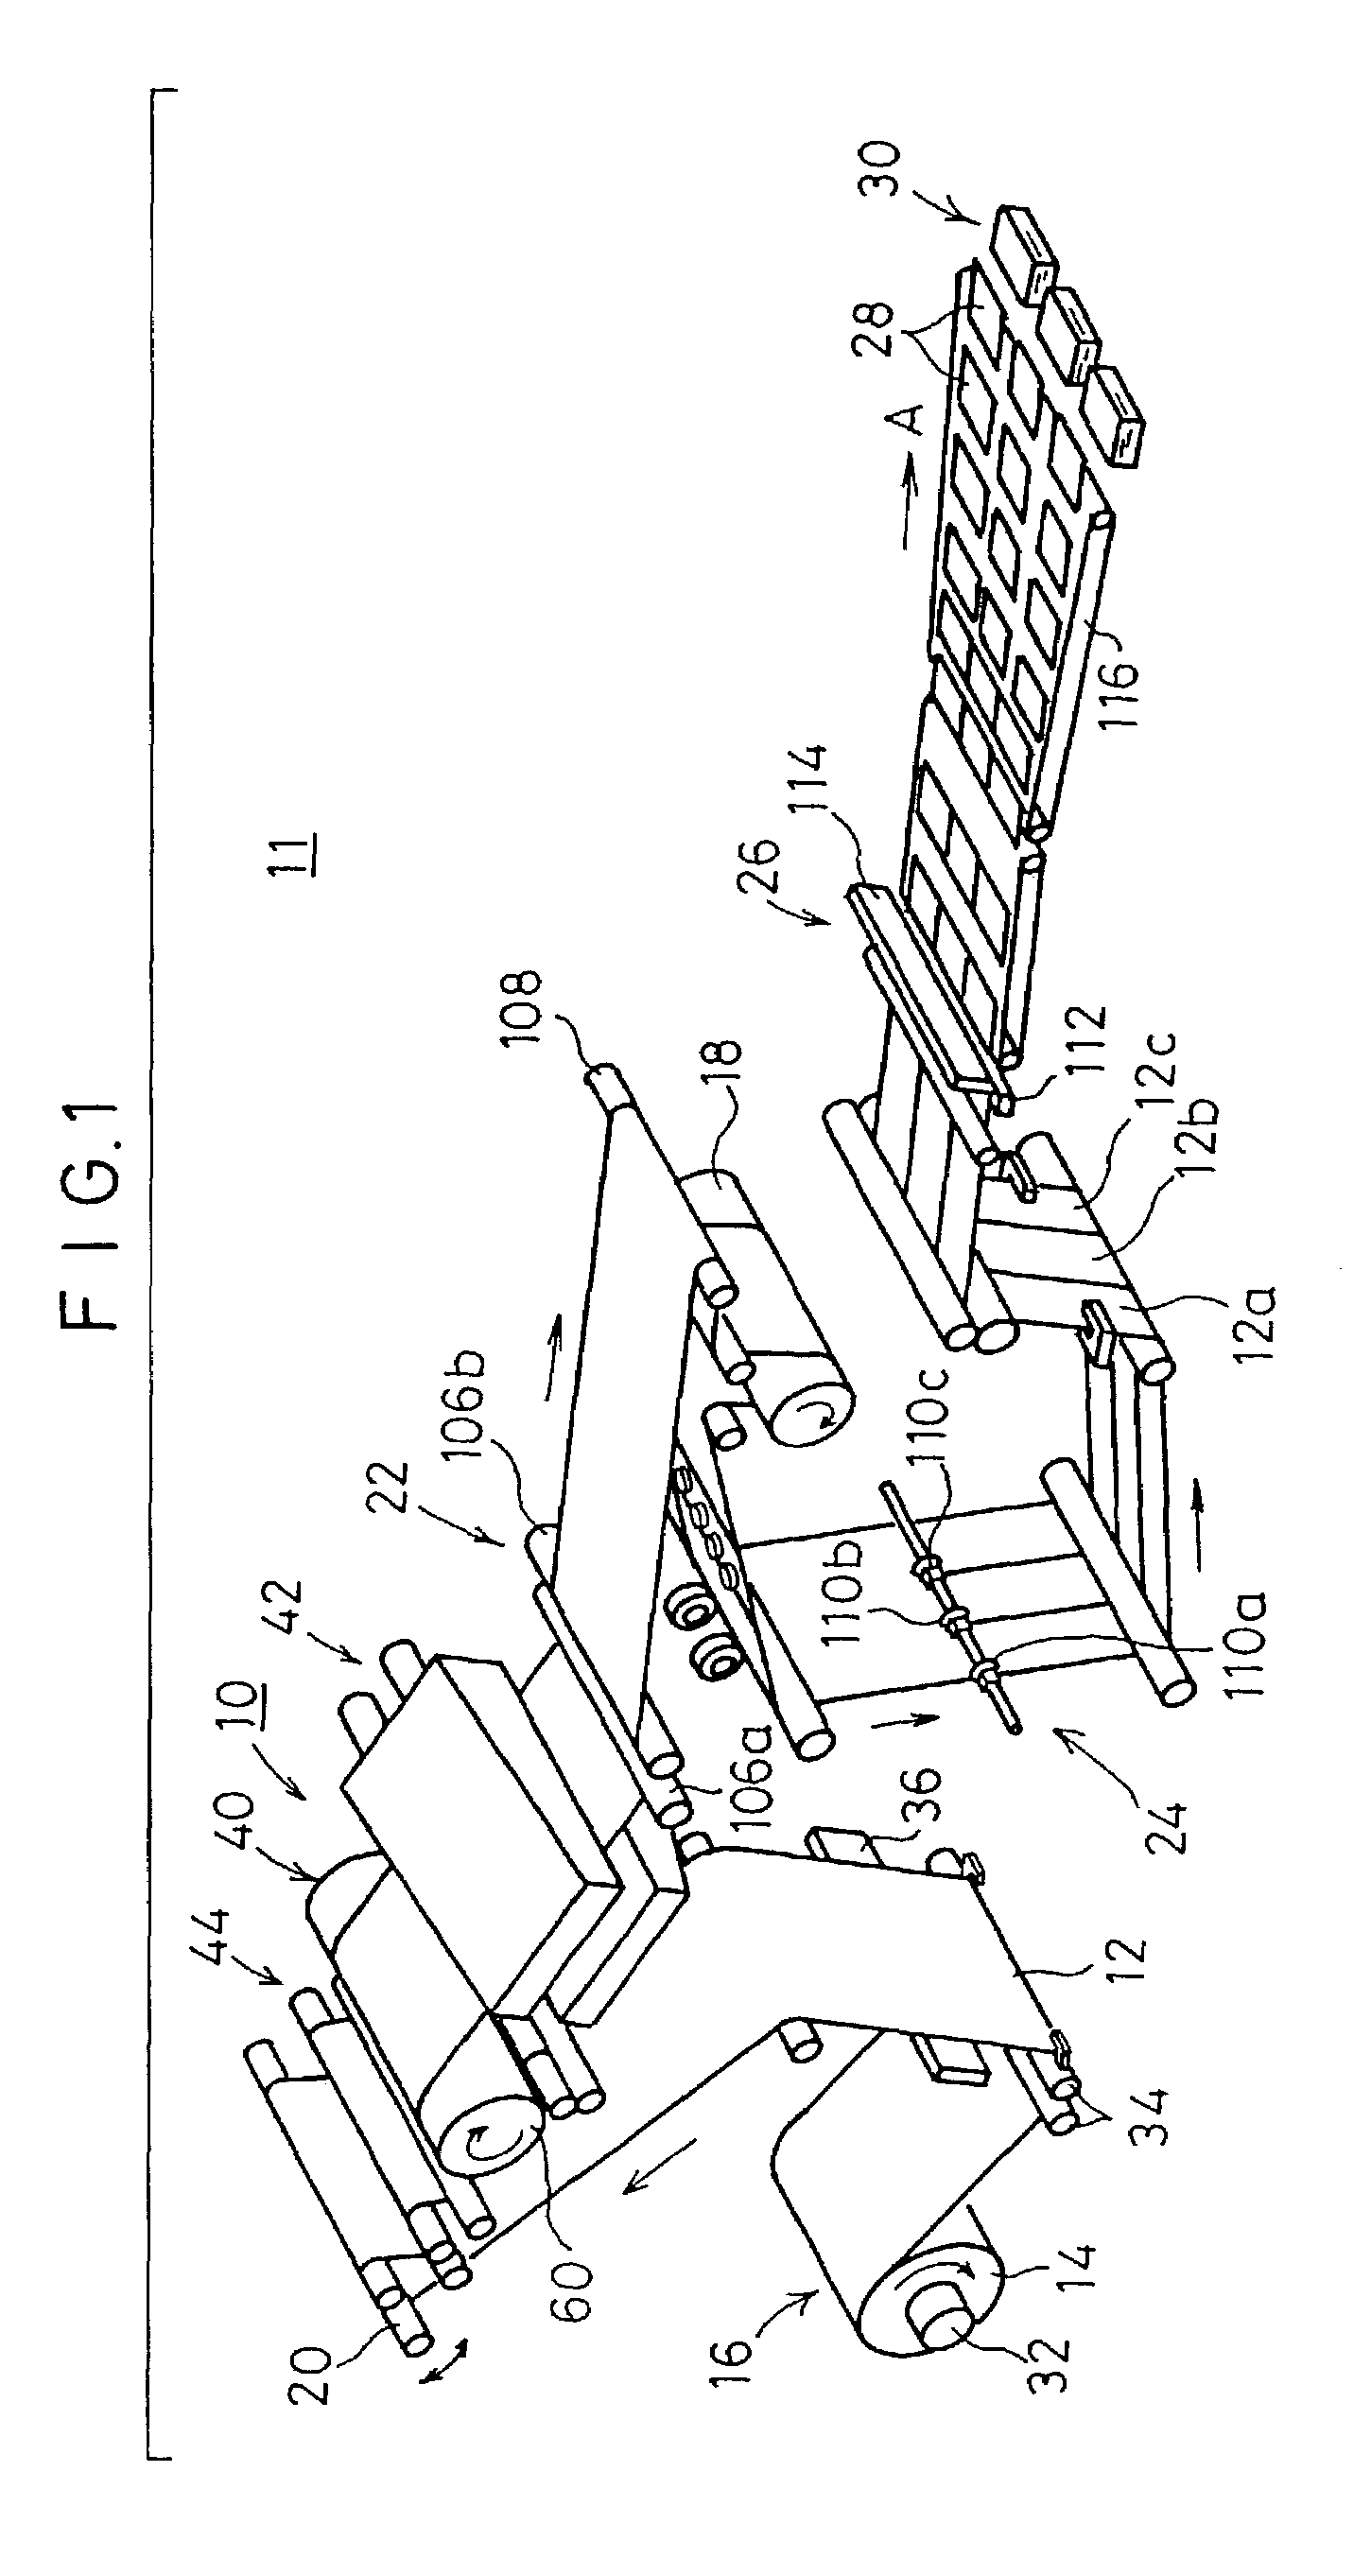 Sheet material cutting method for cutting thermal imaging material